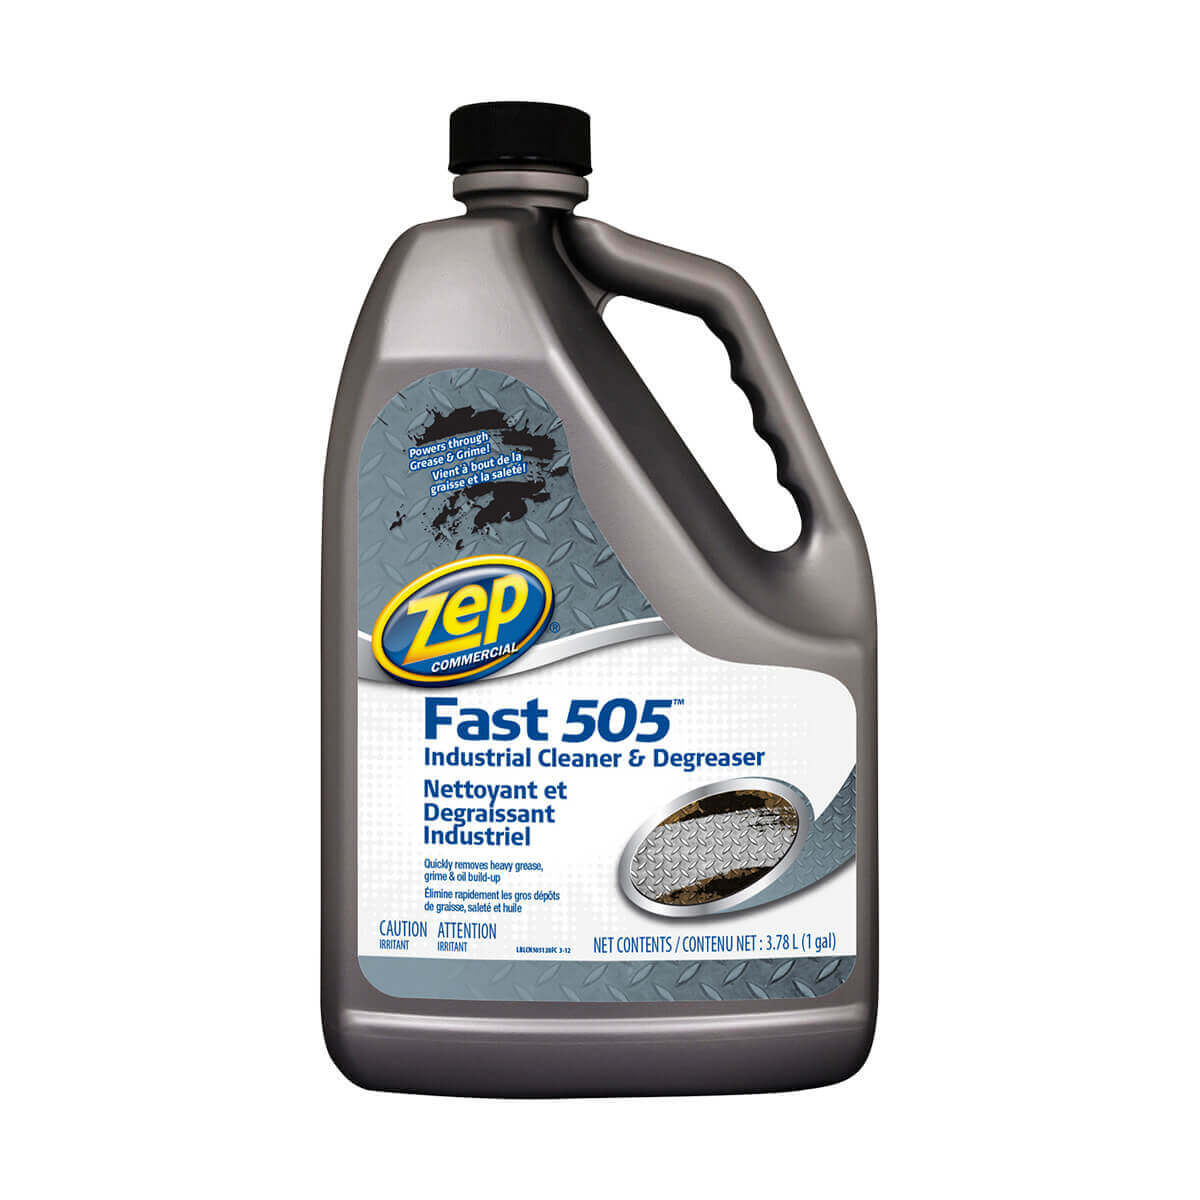 Zep Commercial Fast 505 Industrial Cleaner & Degreaser - 3.78 L